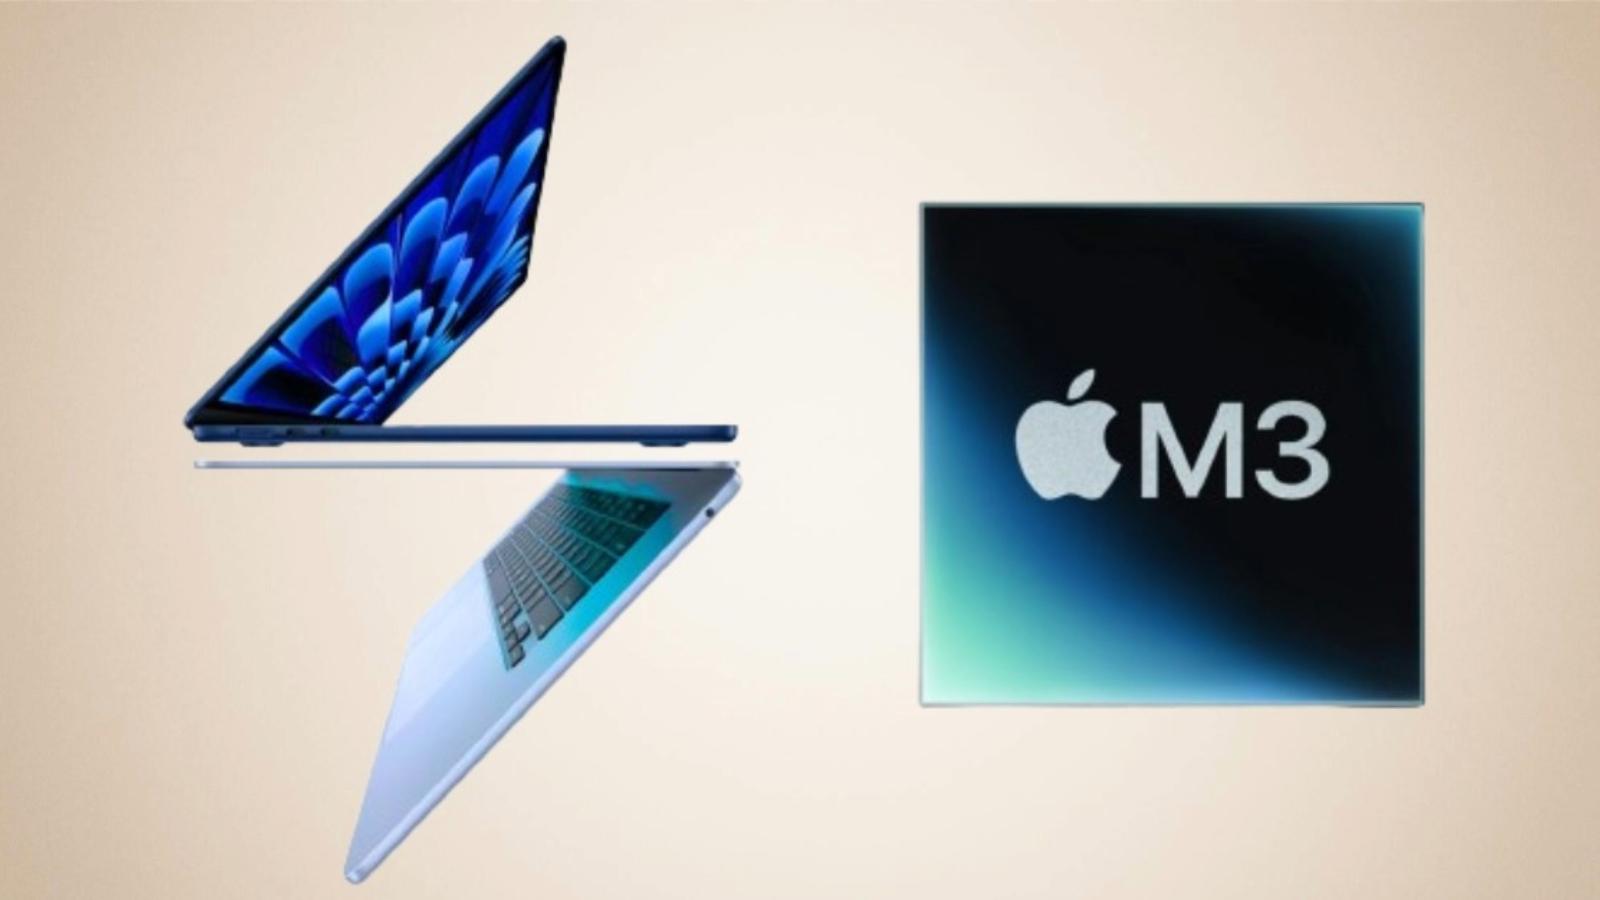 Apple M3 MacBook Air with M3 chip logo next to it